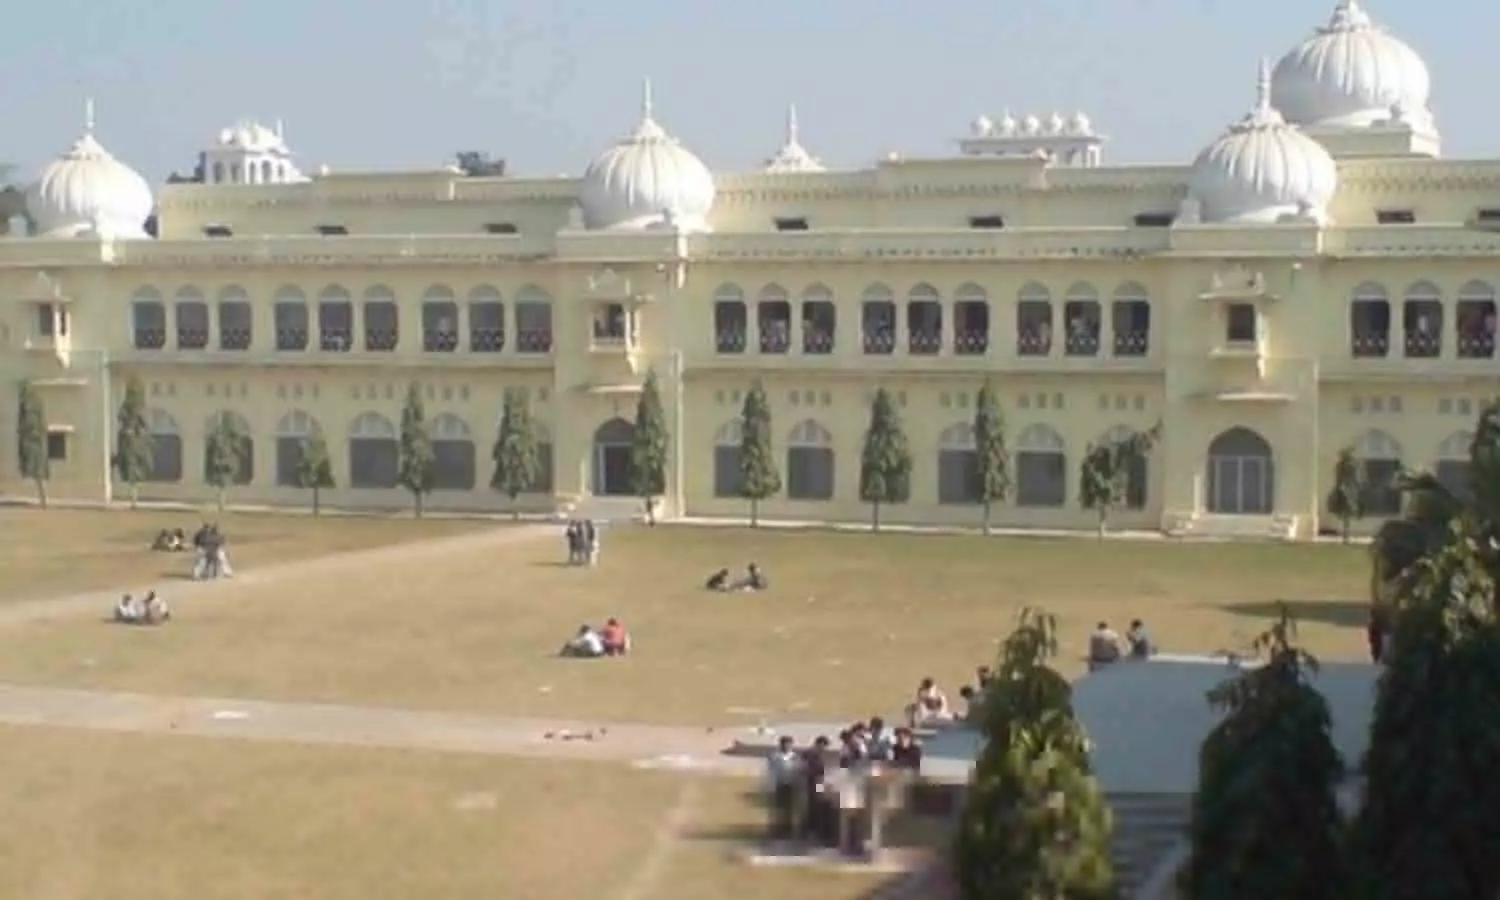 Lucknow University: Exam date of many PG courses has come, MA Philosophy examinations will start from April 16